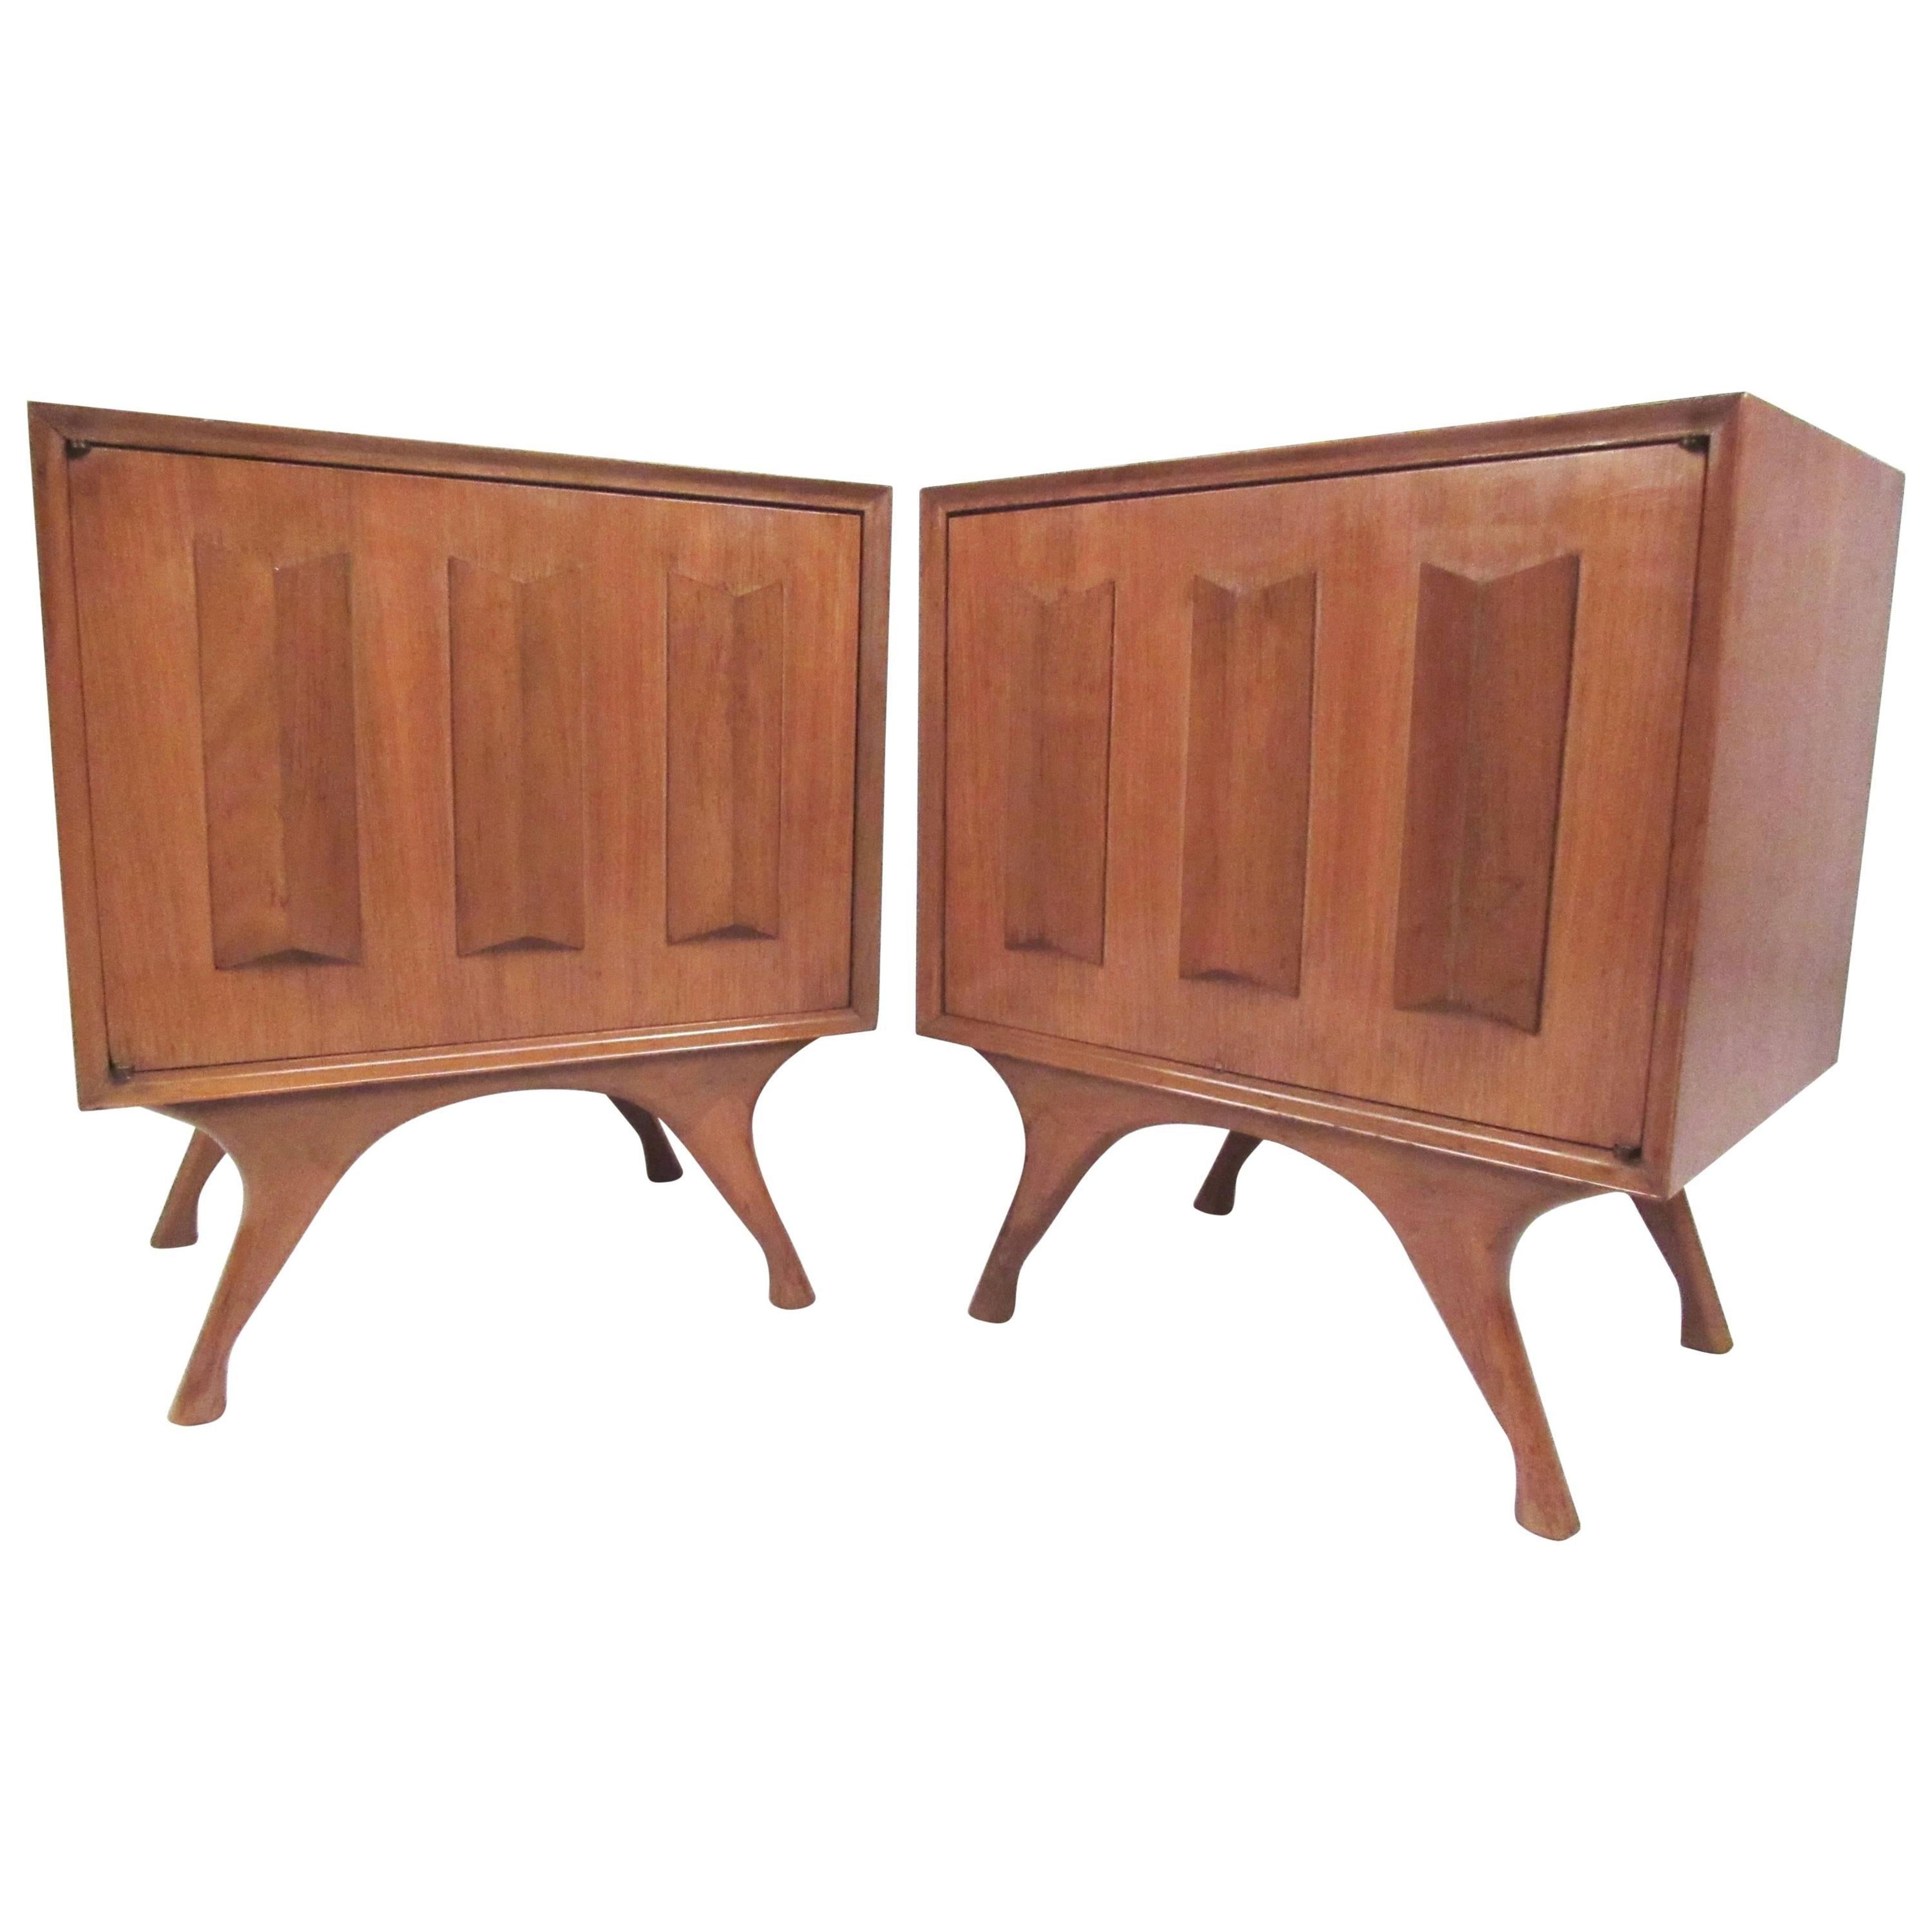 Vintage 80s Laminate Bubble Front Nightstands, a Pair For Sale at 1stDibs